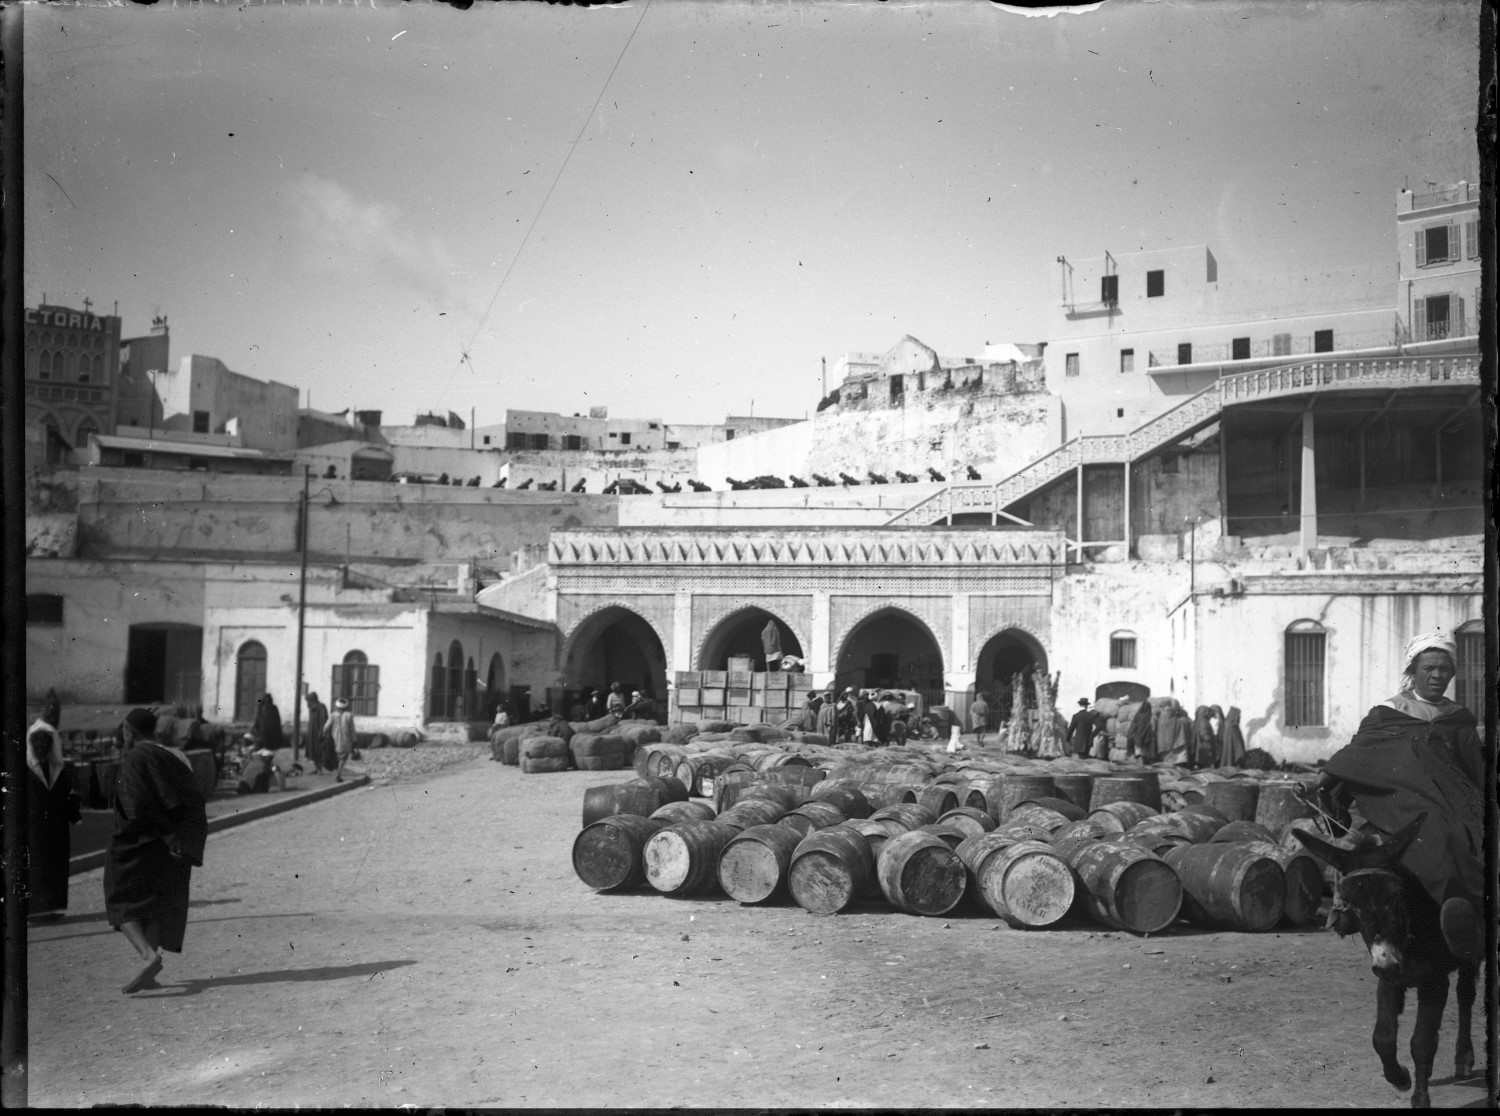 People in traditional dress and barrels at port 